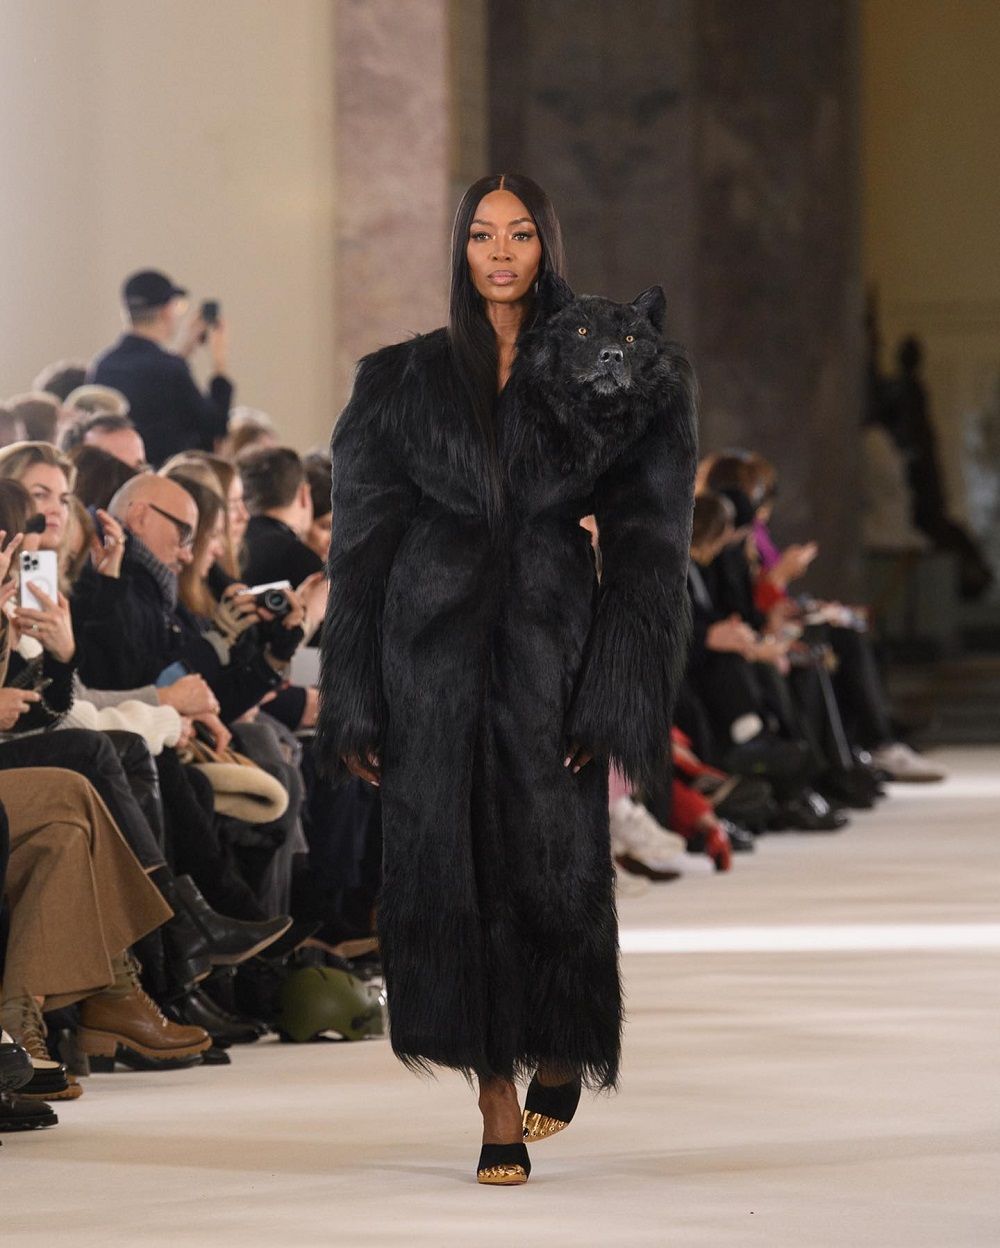 Kylie Jenner & Doja Cat Attend Schiaparelli's Haute Couture Spring-Summer  2023 Fashion Show in Paris Wearing Larger-Than-Life Outfits — See Photos